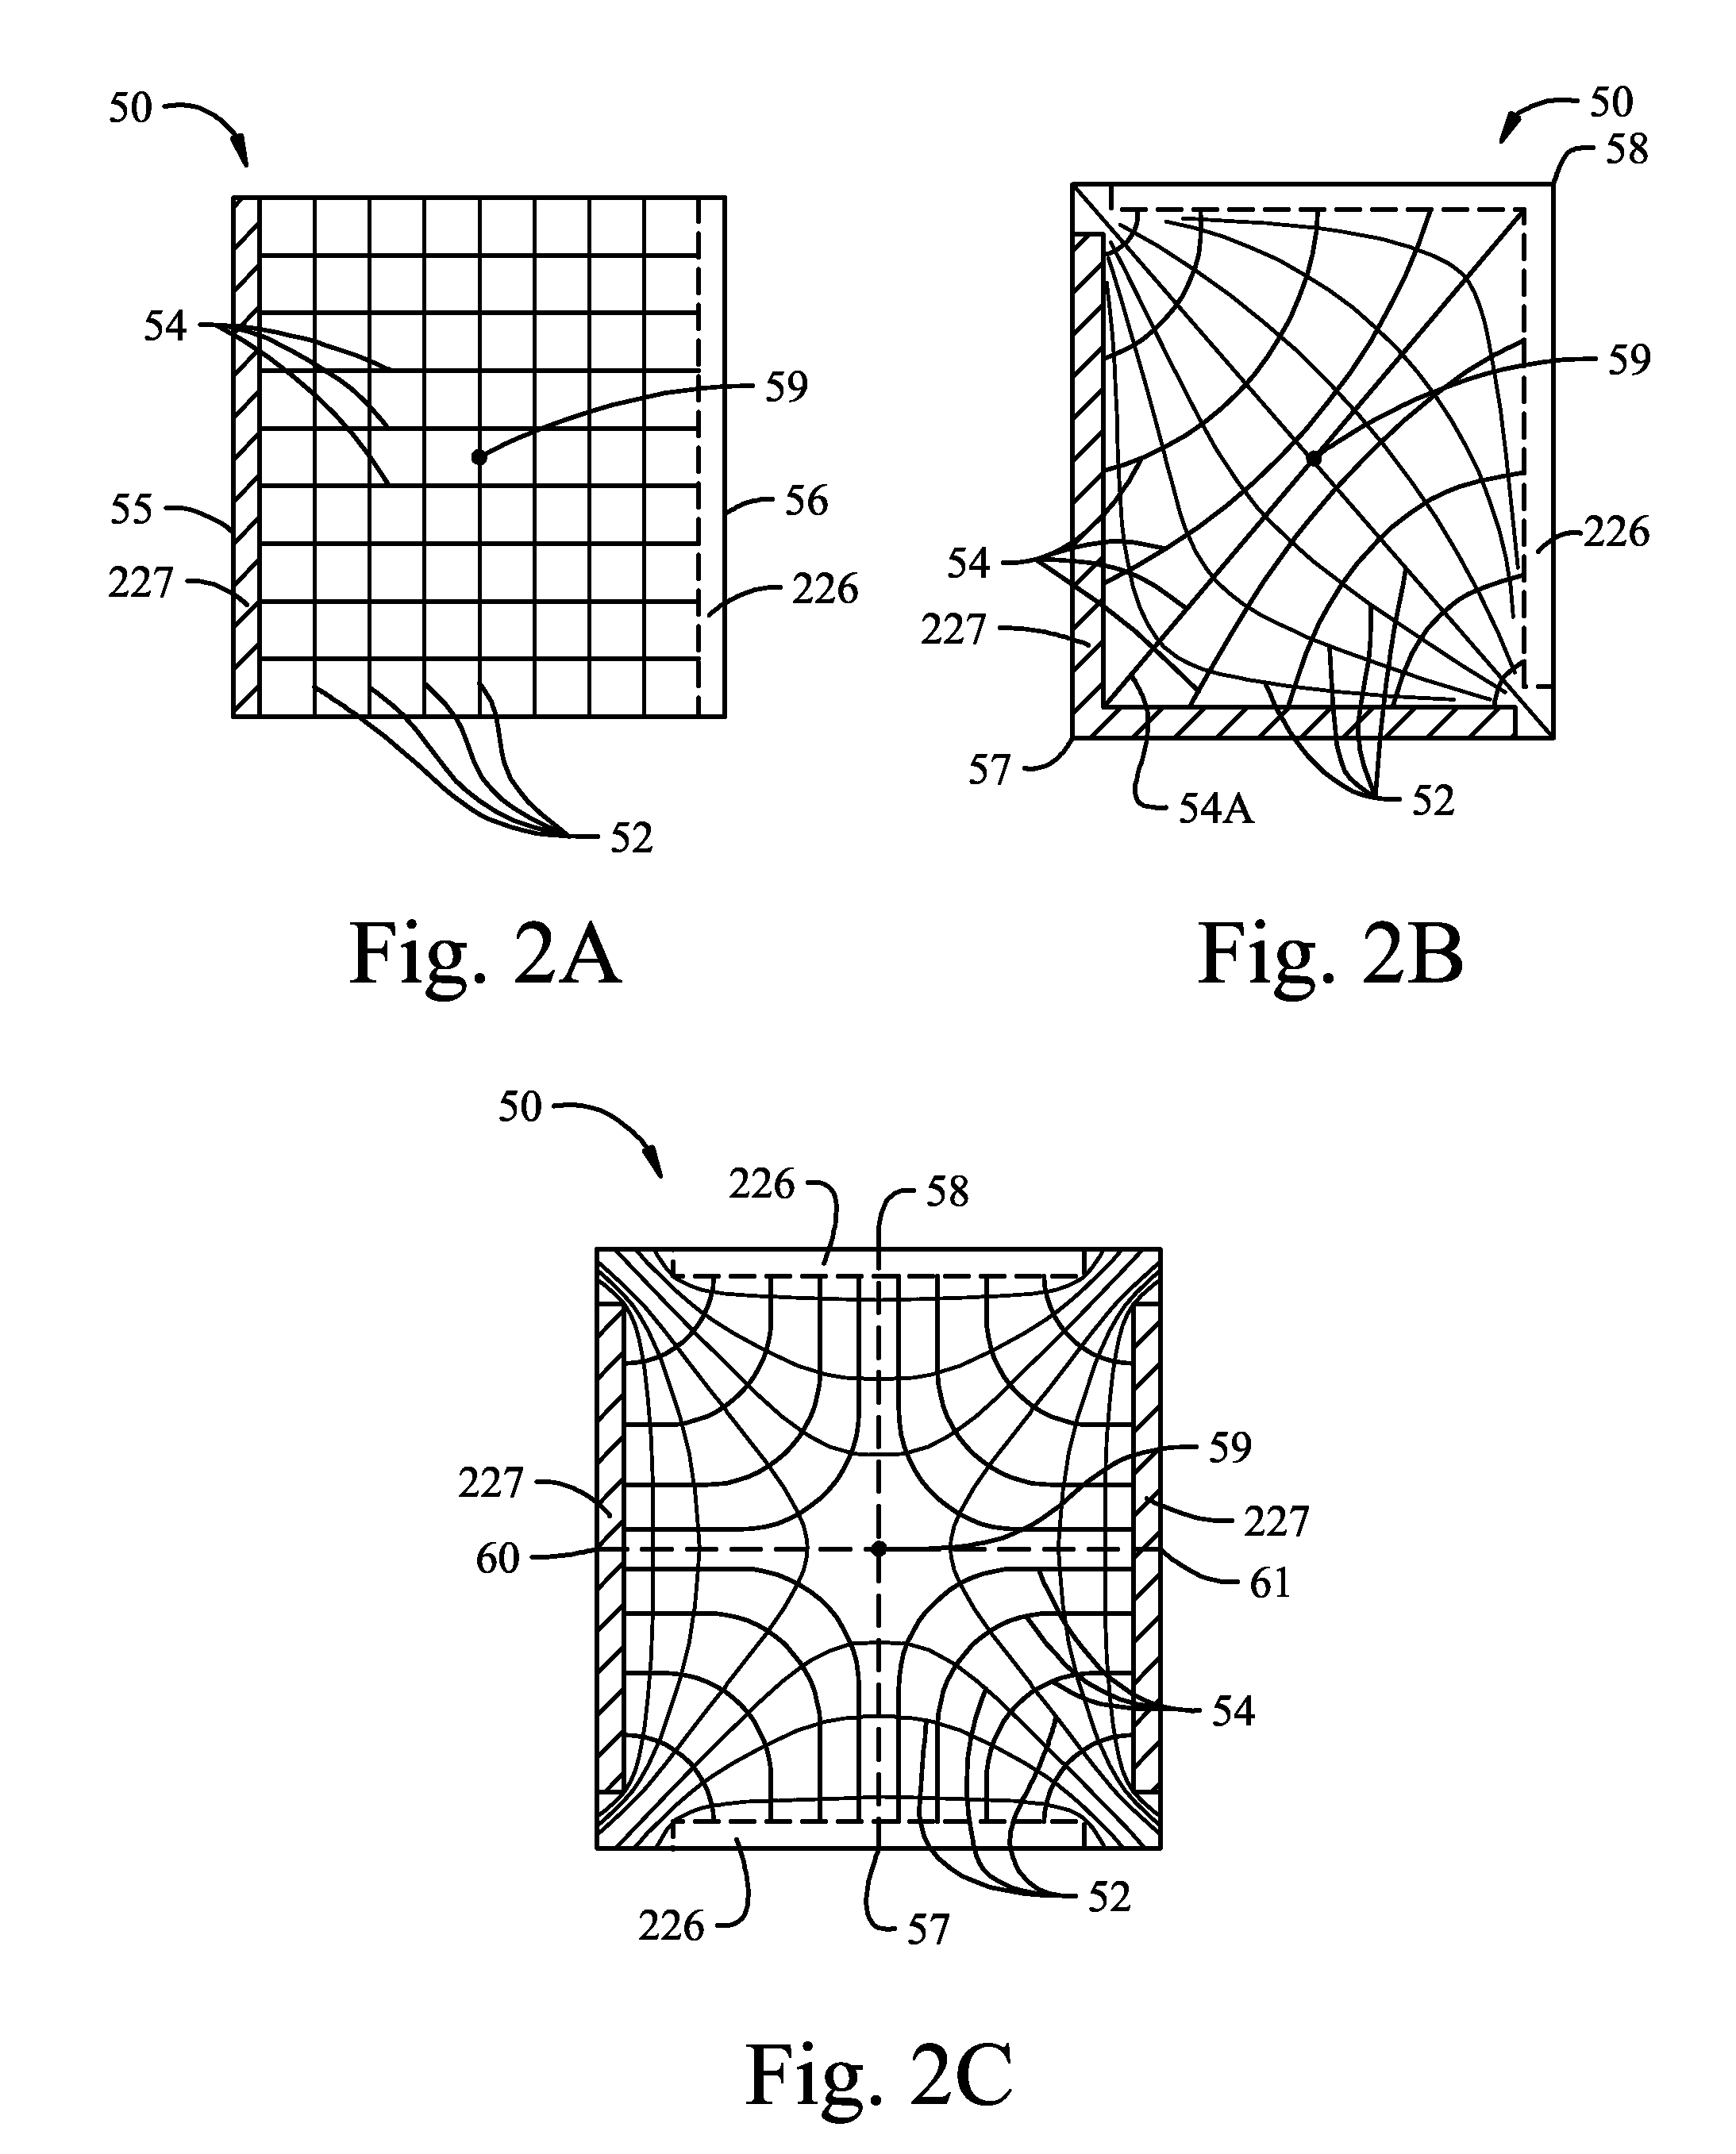 Electrochromic multi-layer devices with spatially coordinated switching